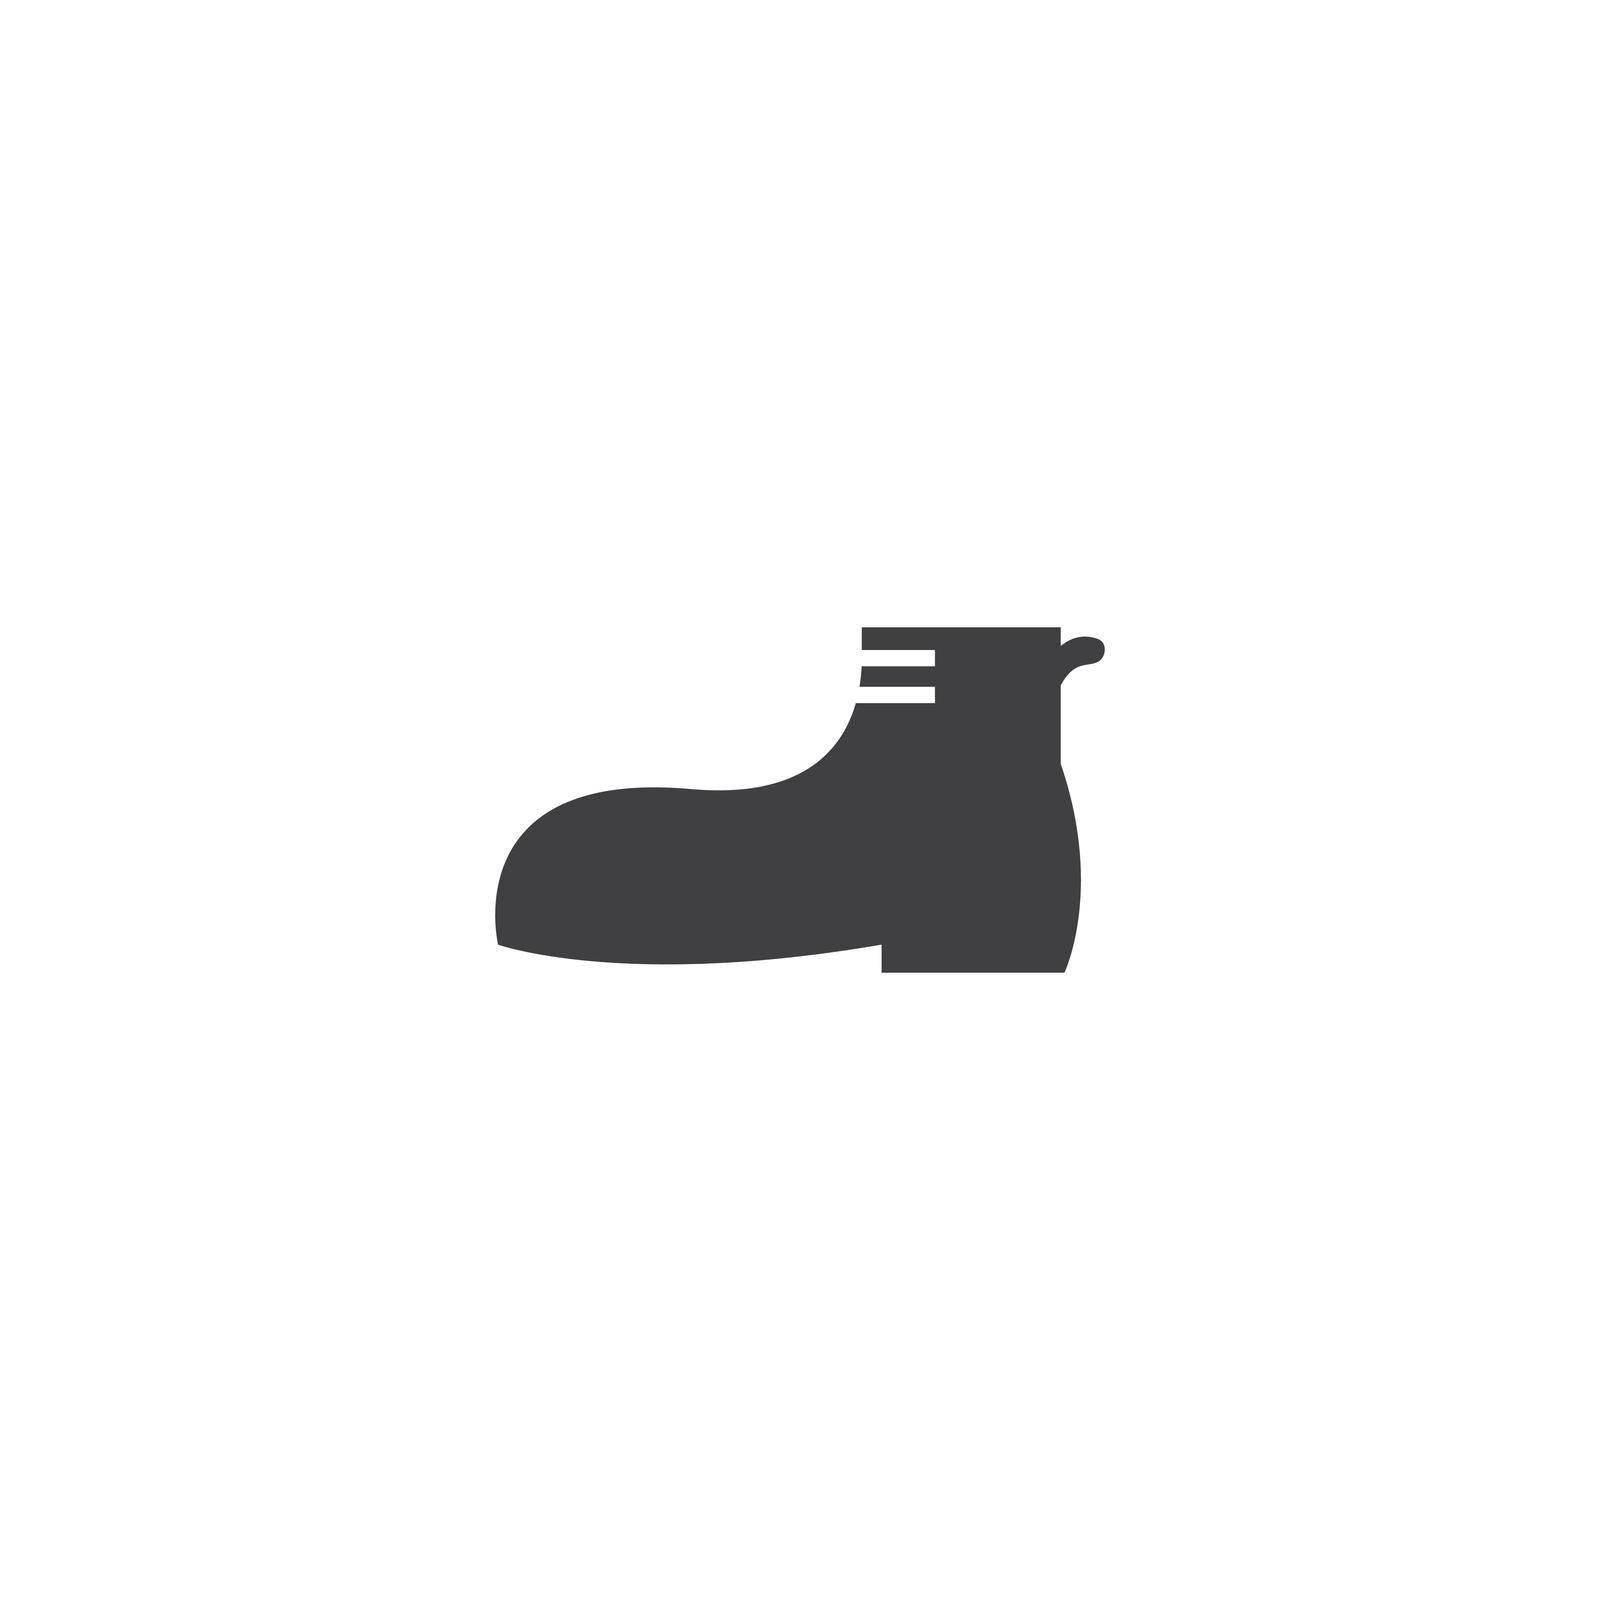 Black army shoe flat icon vector